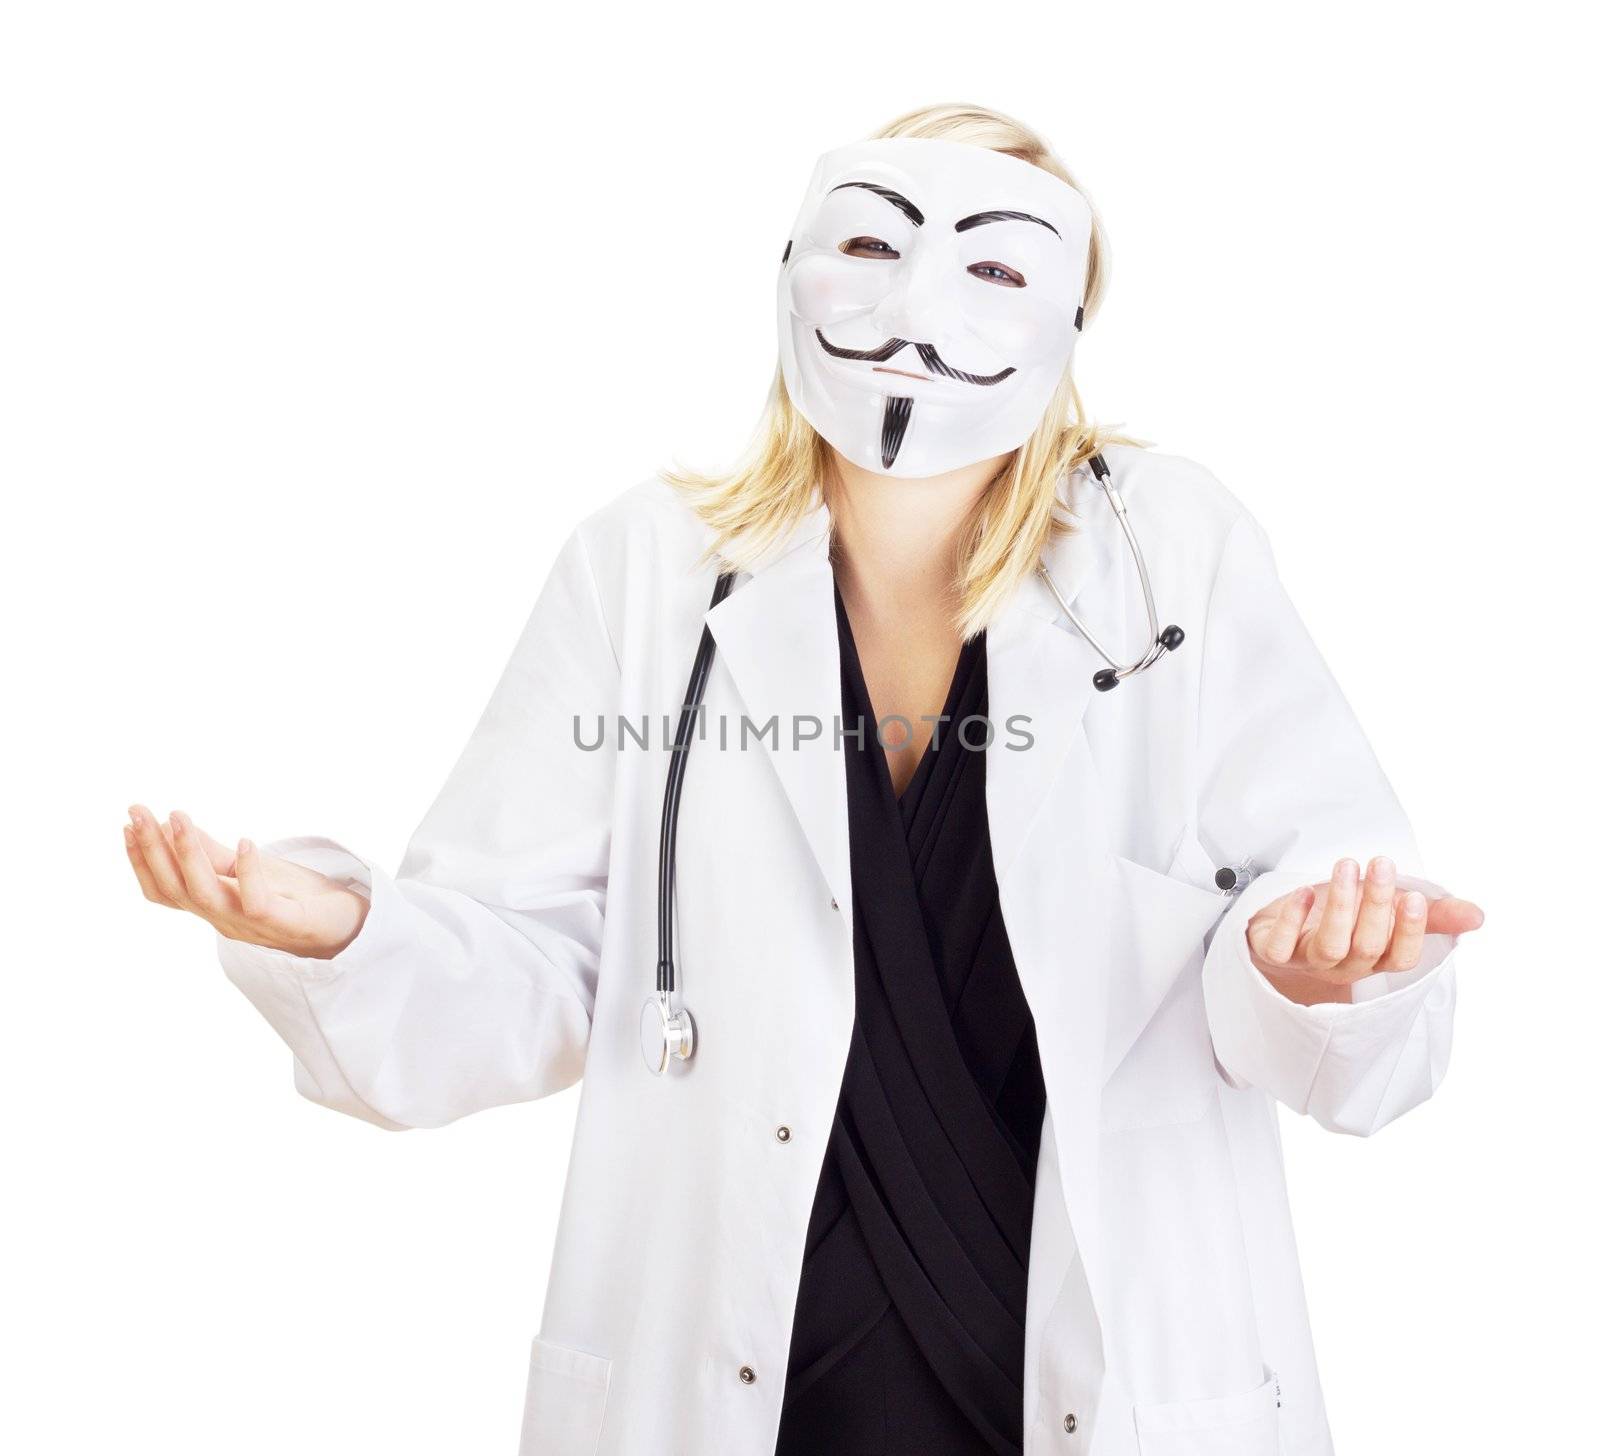 Medical doctor with a guy fawkes mask by gwolters